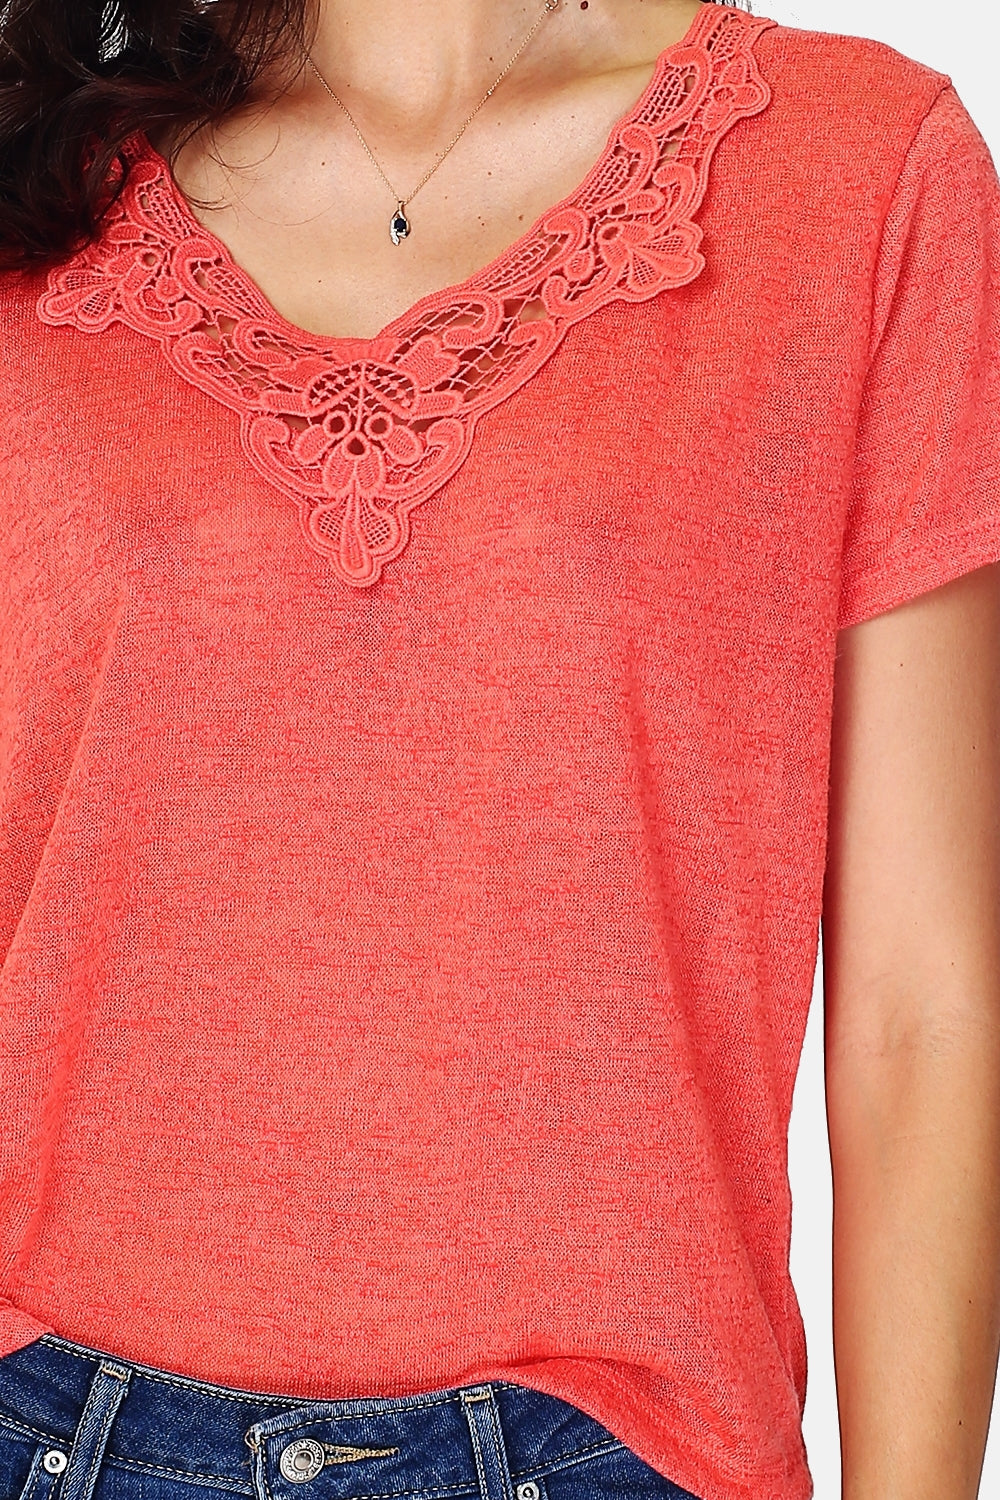 Round neck T-shirt with inlaid embroidery in short sleeves